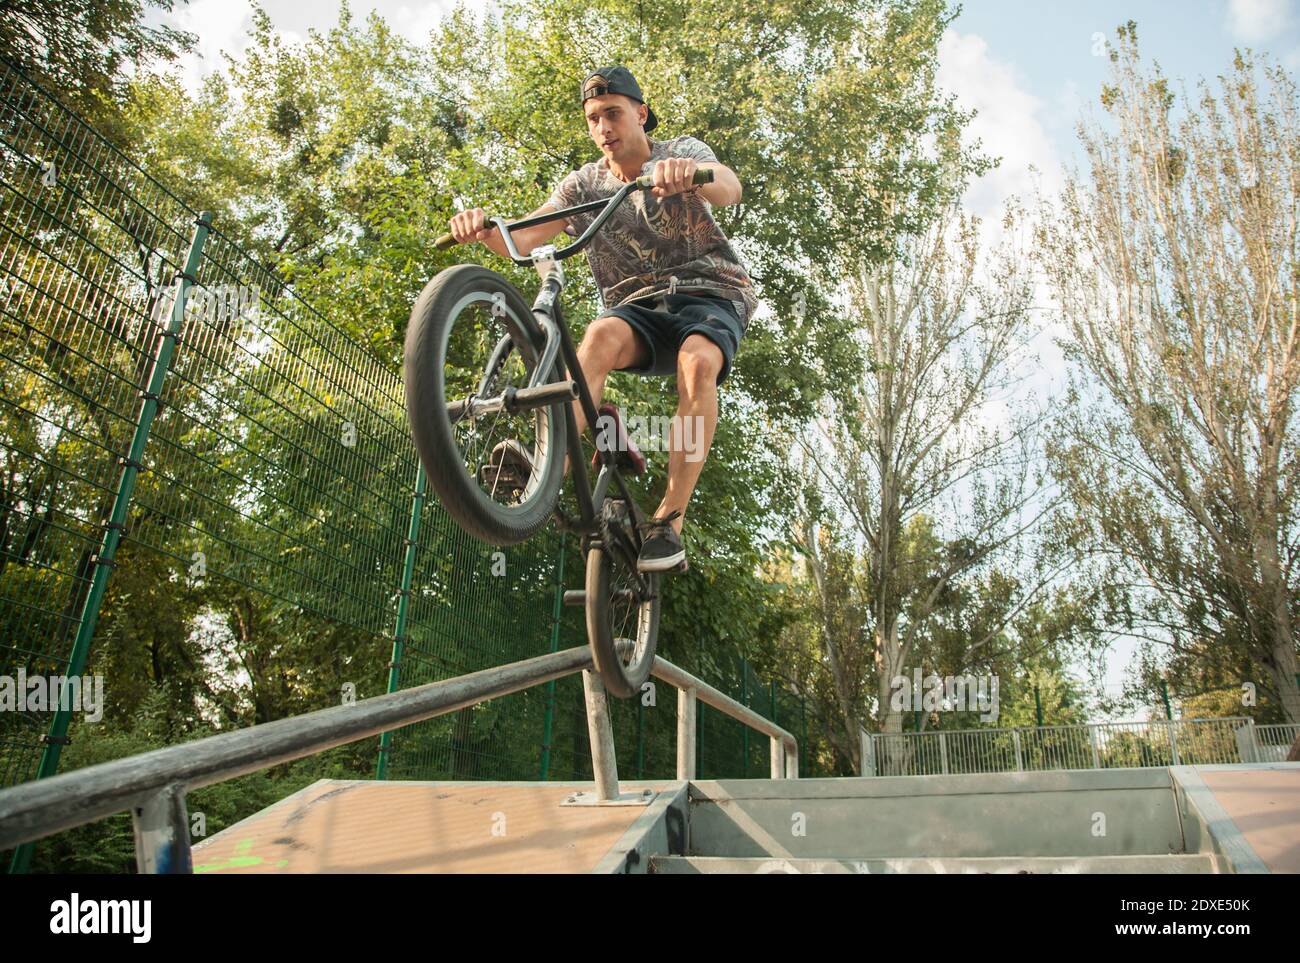 Young man riding BMX bike on jumps in park, Budapest, Hungary Stock Photo -  Alamy